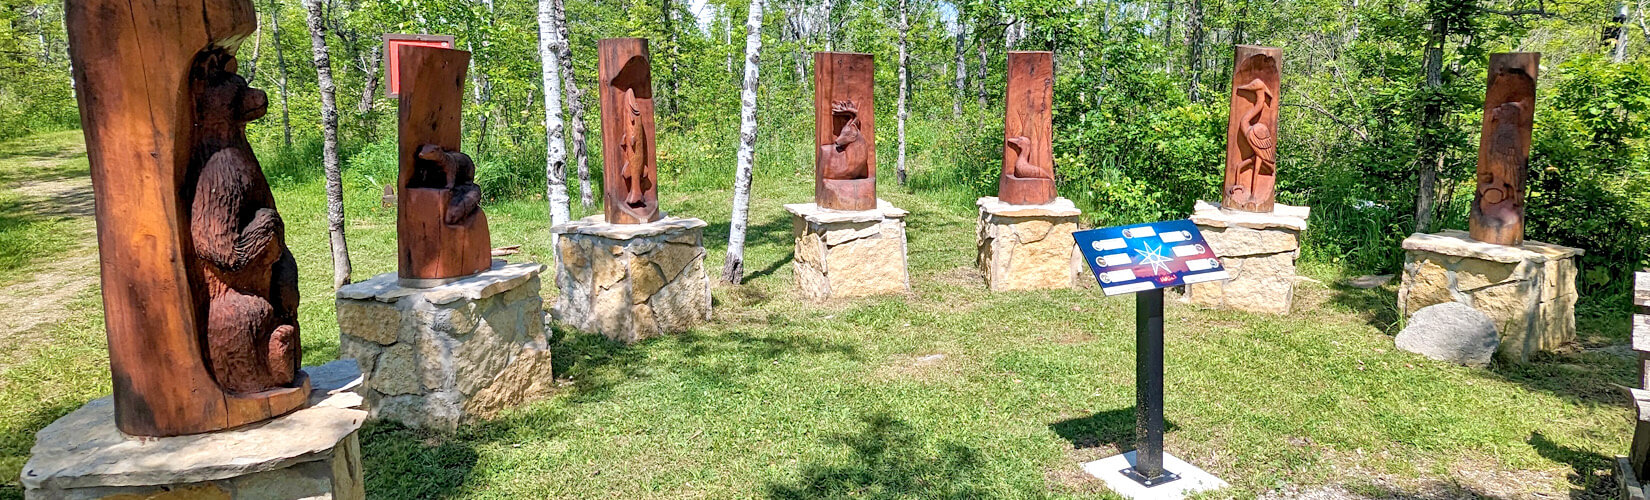 Experiencing Wikwemikong: The Leading Indigenous Tourism Destination in Ontario :: I've Been Bit! Travel Blog